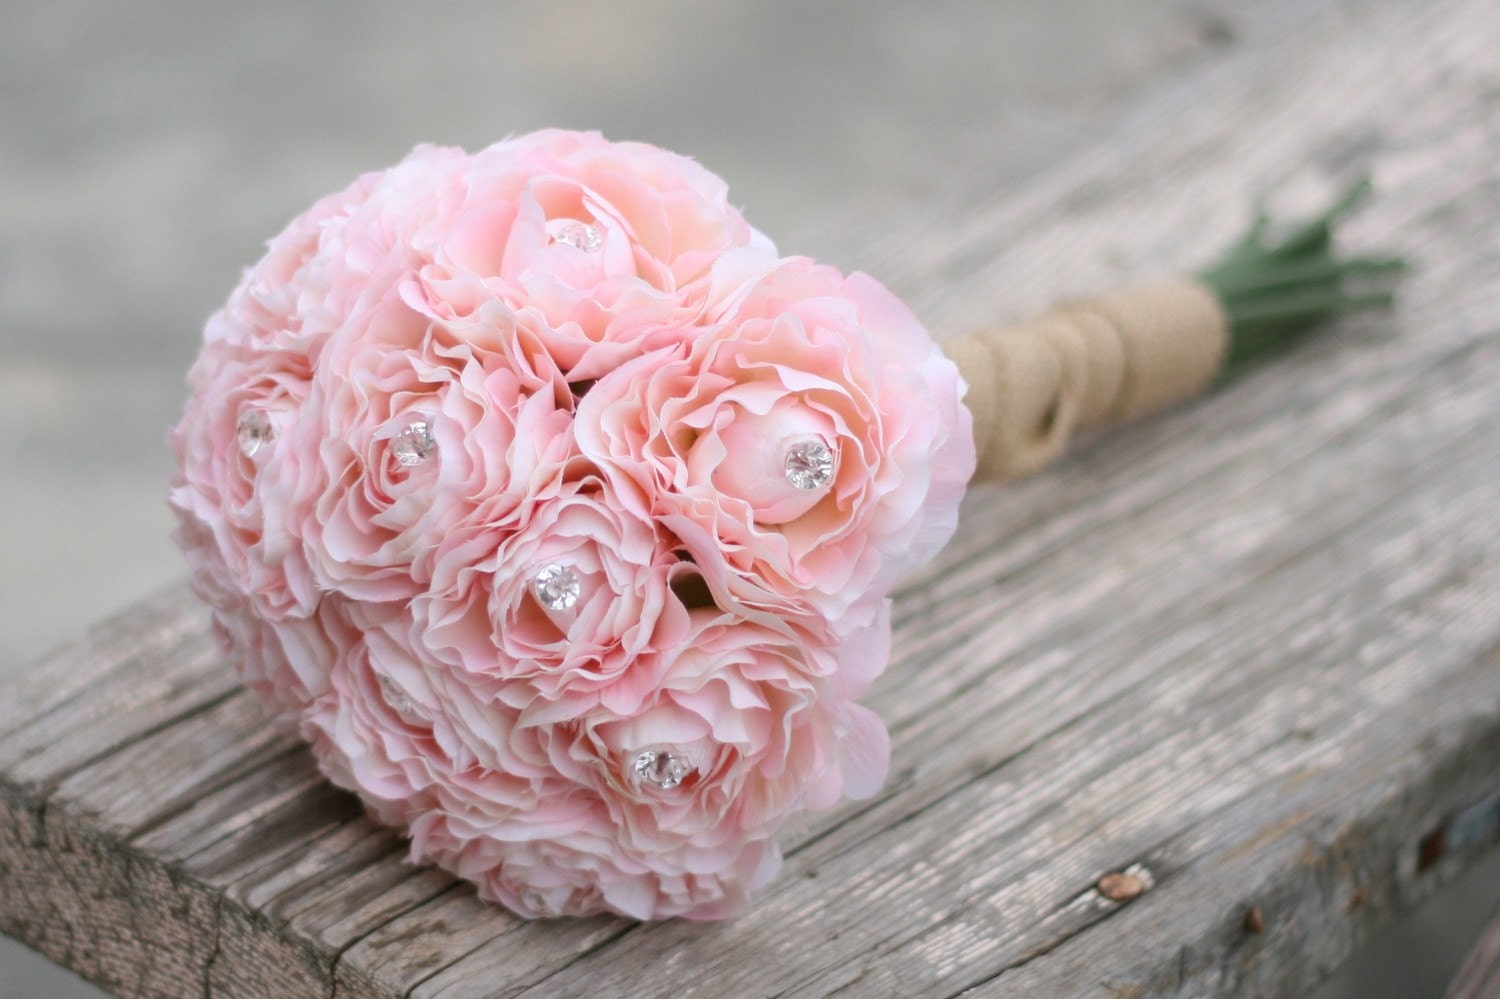 Bride Bouquet Cotton Candy Pink Ranunculus With Diamond Rhinestone Accents Wrapped In Rustic Burlap